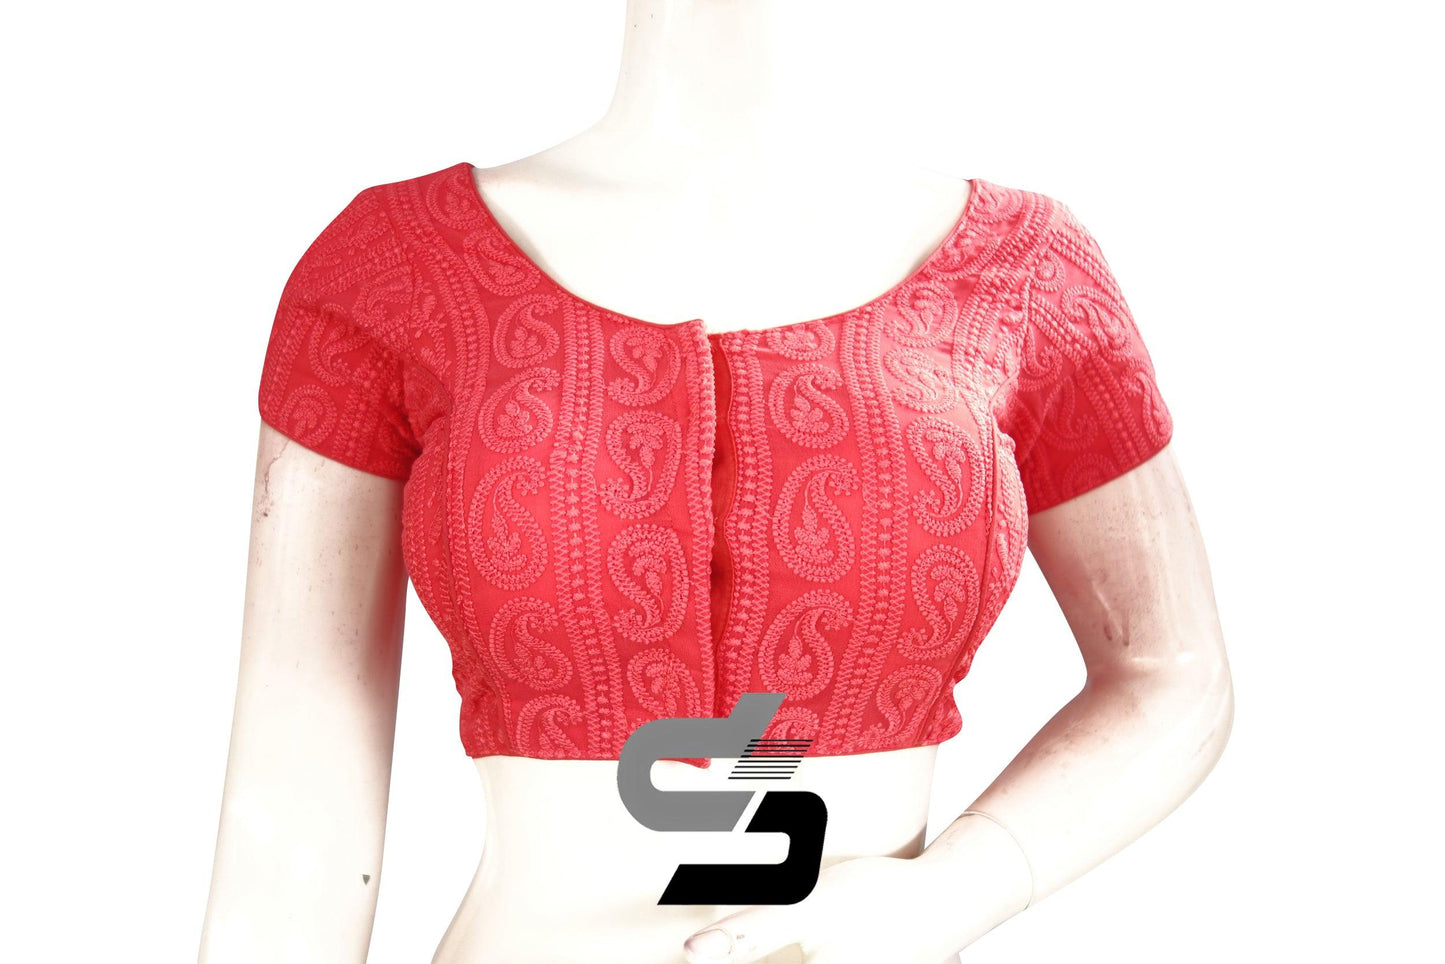 Pink Color Chikankari Embroidery Readymade saree blouse, Indian Readymade blouse, Croptop - D3blouses